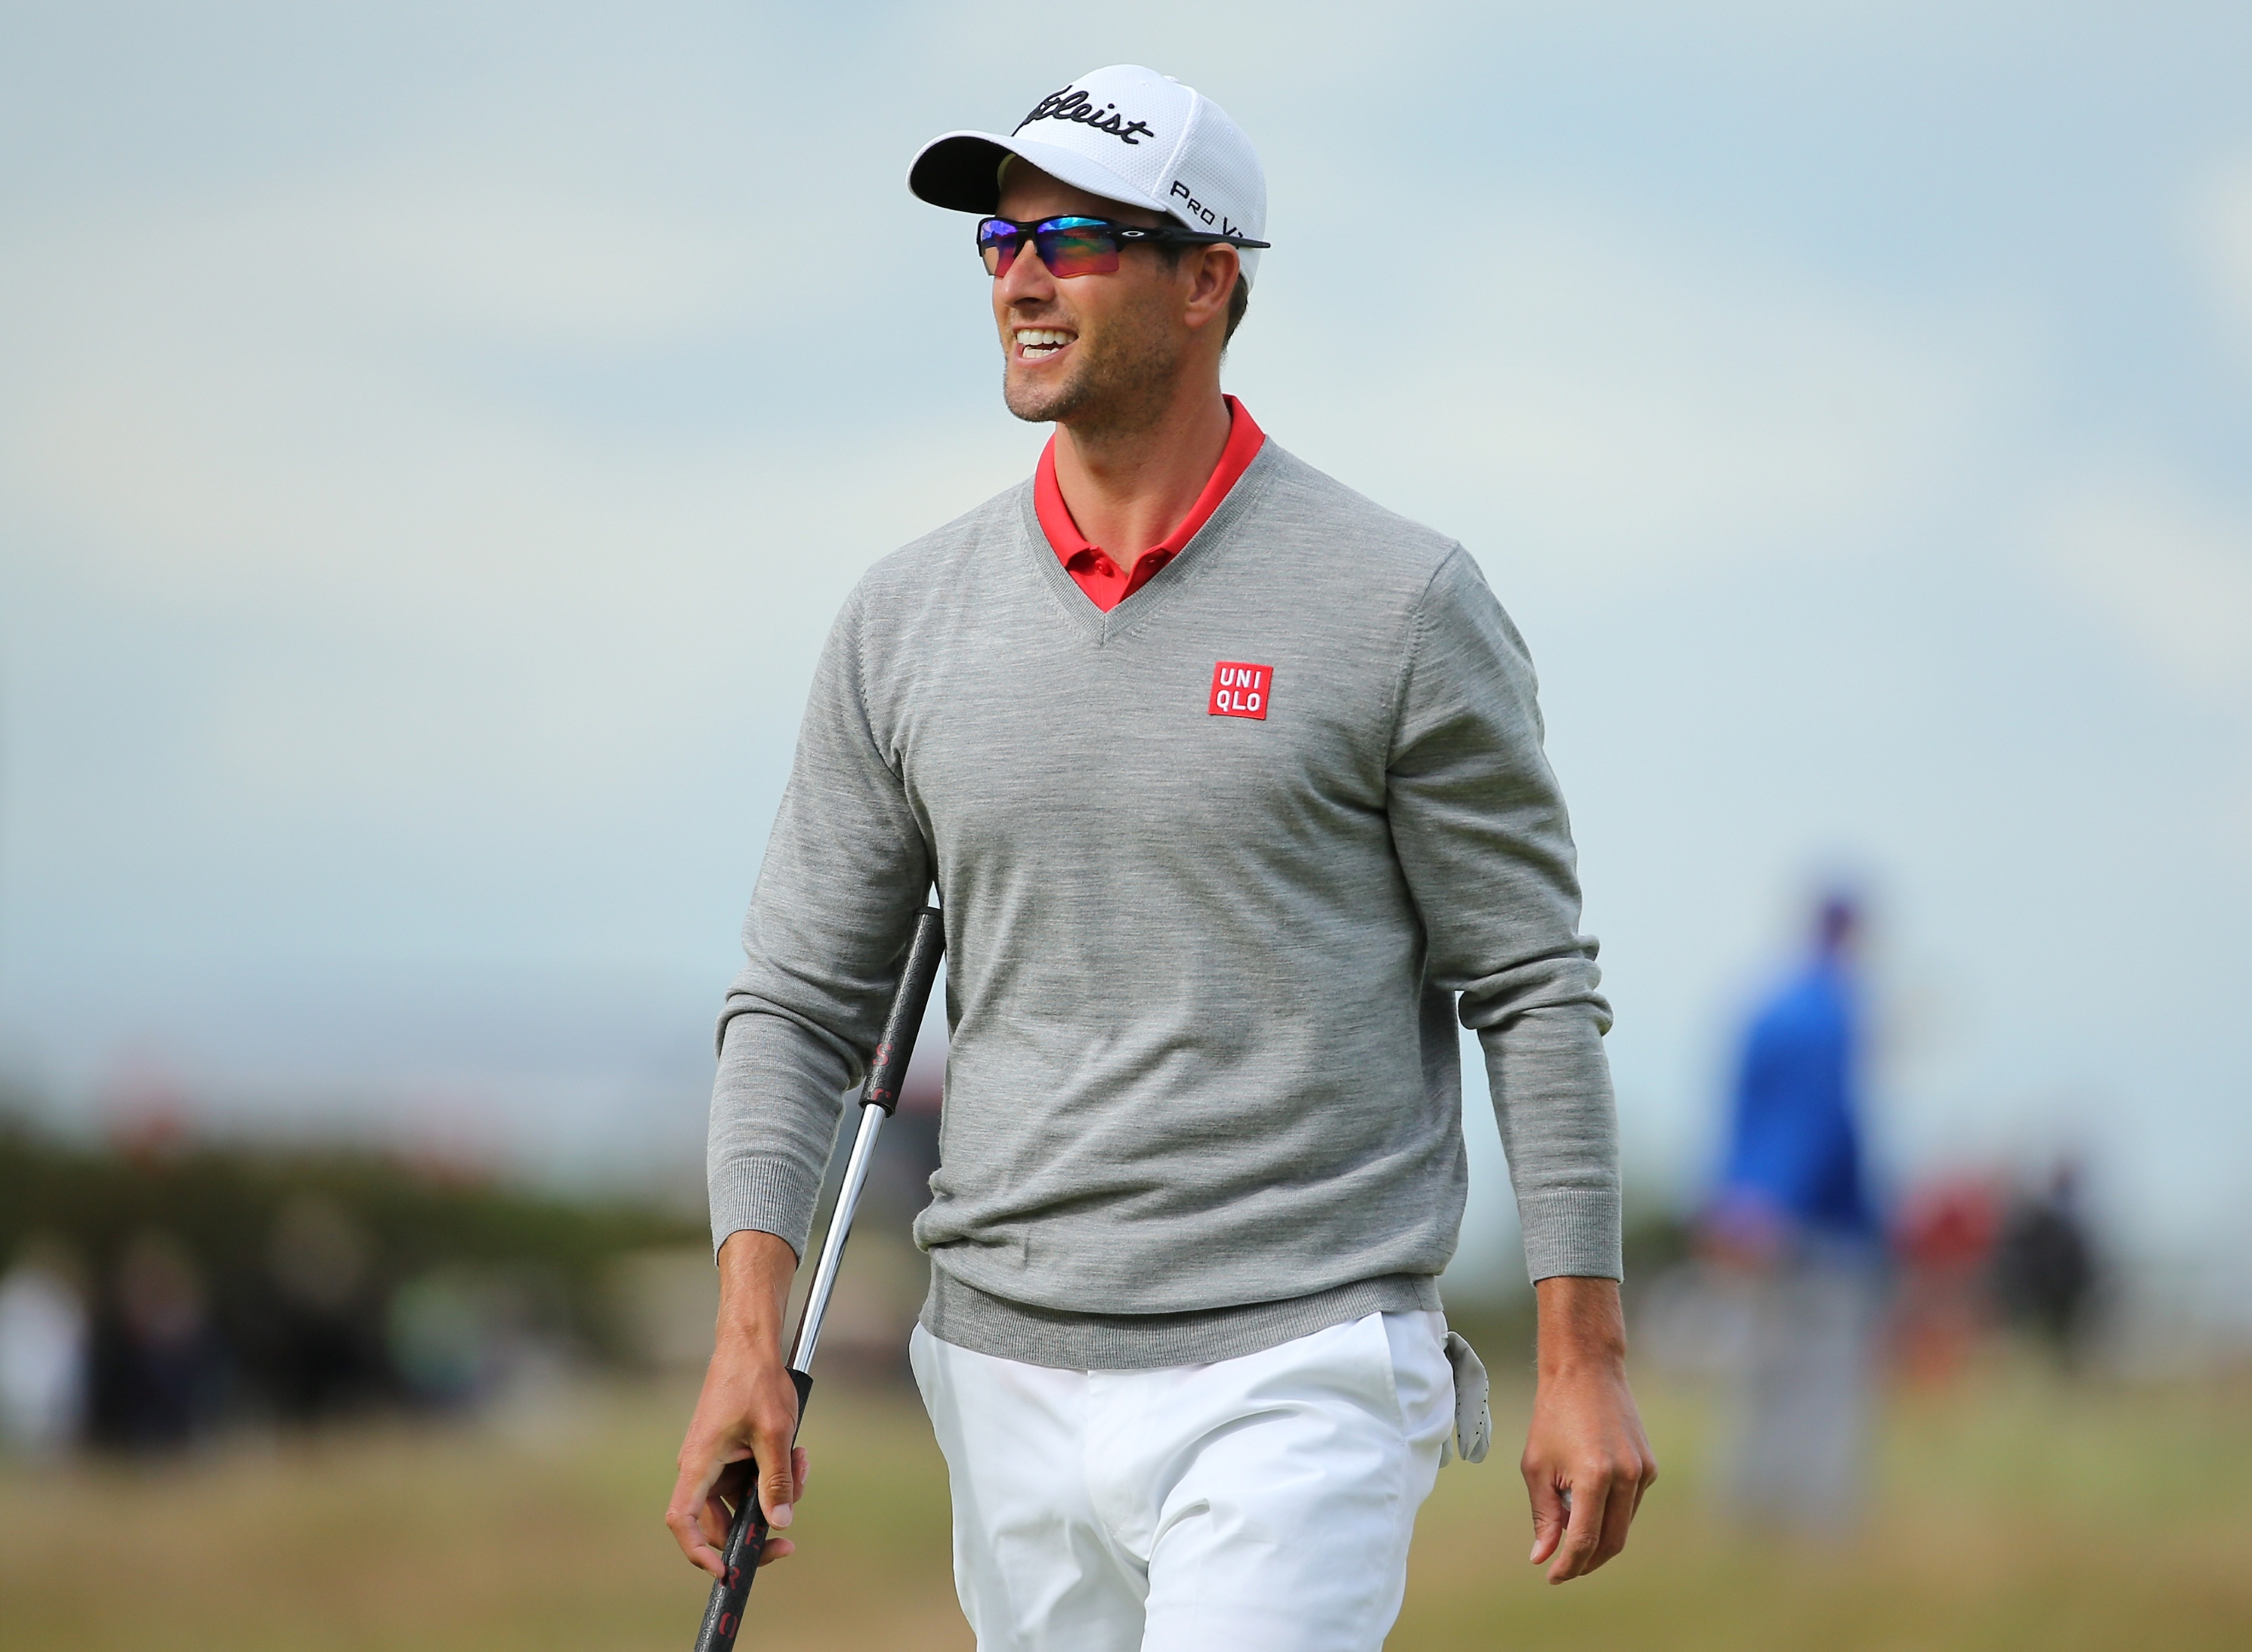 ST ANDREWS, SCOTLAND - JULY 17:  Adam Scott of Australia walks along the 17th hole during the second round of the 144th Open Championship at The Old Course on July 17, 2015 in St Andrews, Scotland.  (Photo by Mike Ehrmann/Getty Images)